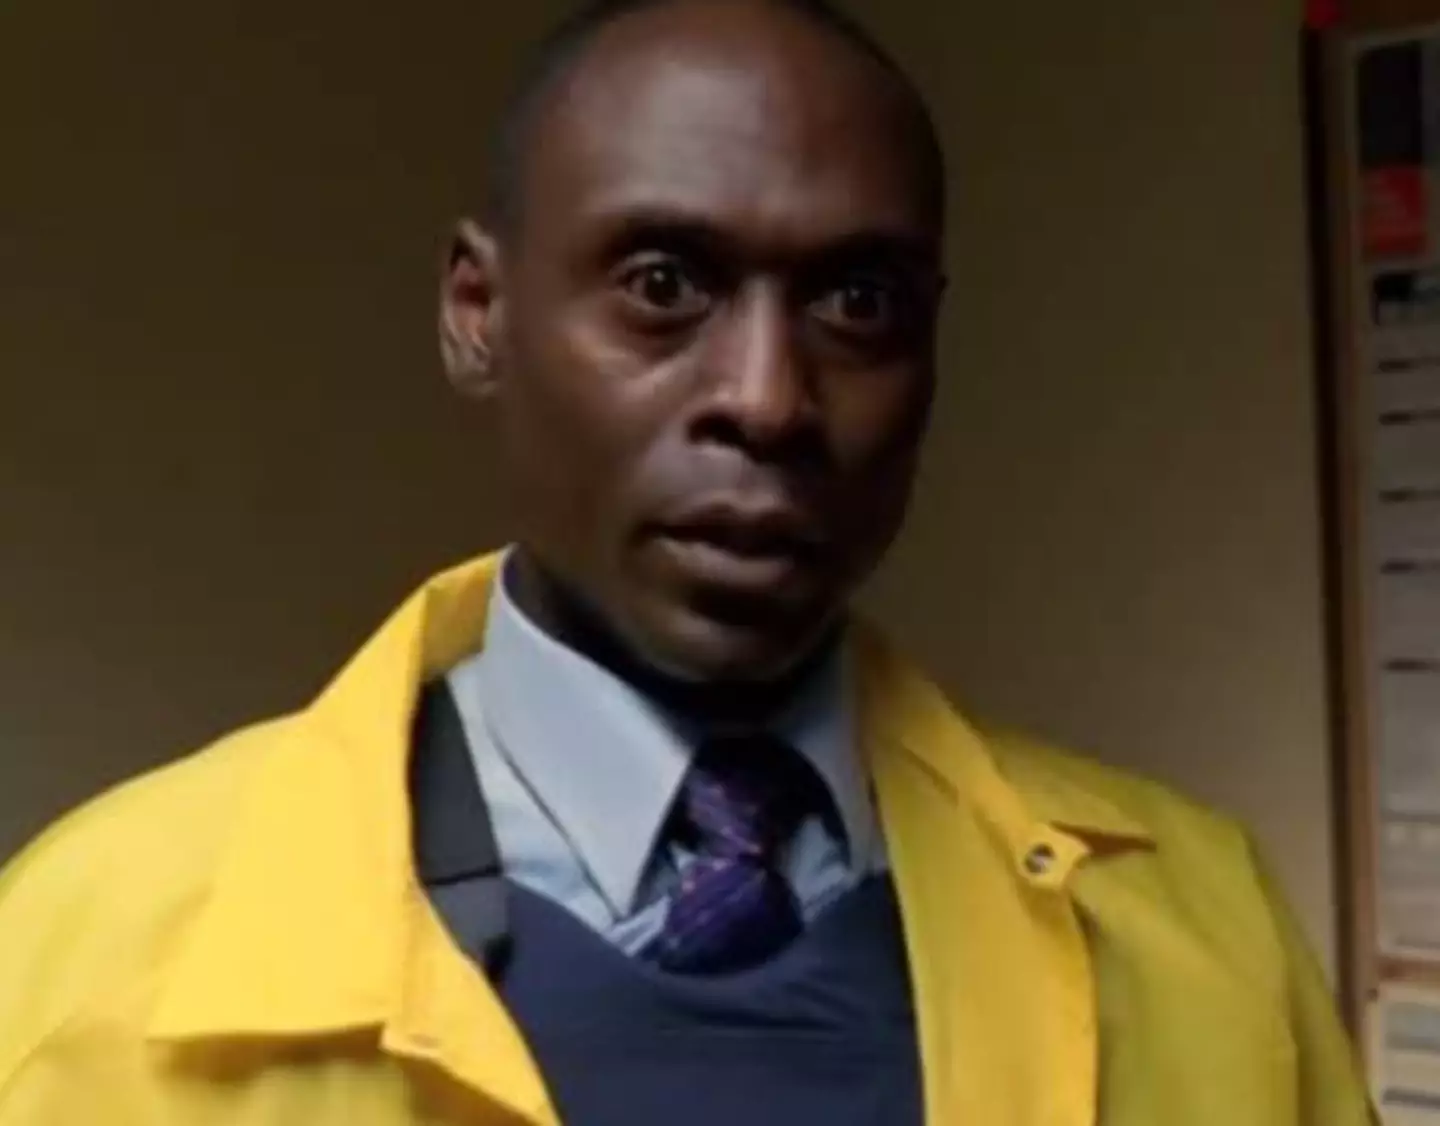 Lance Reddick starred in 'The Wire'.